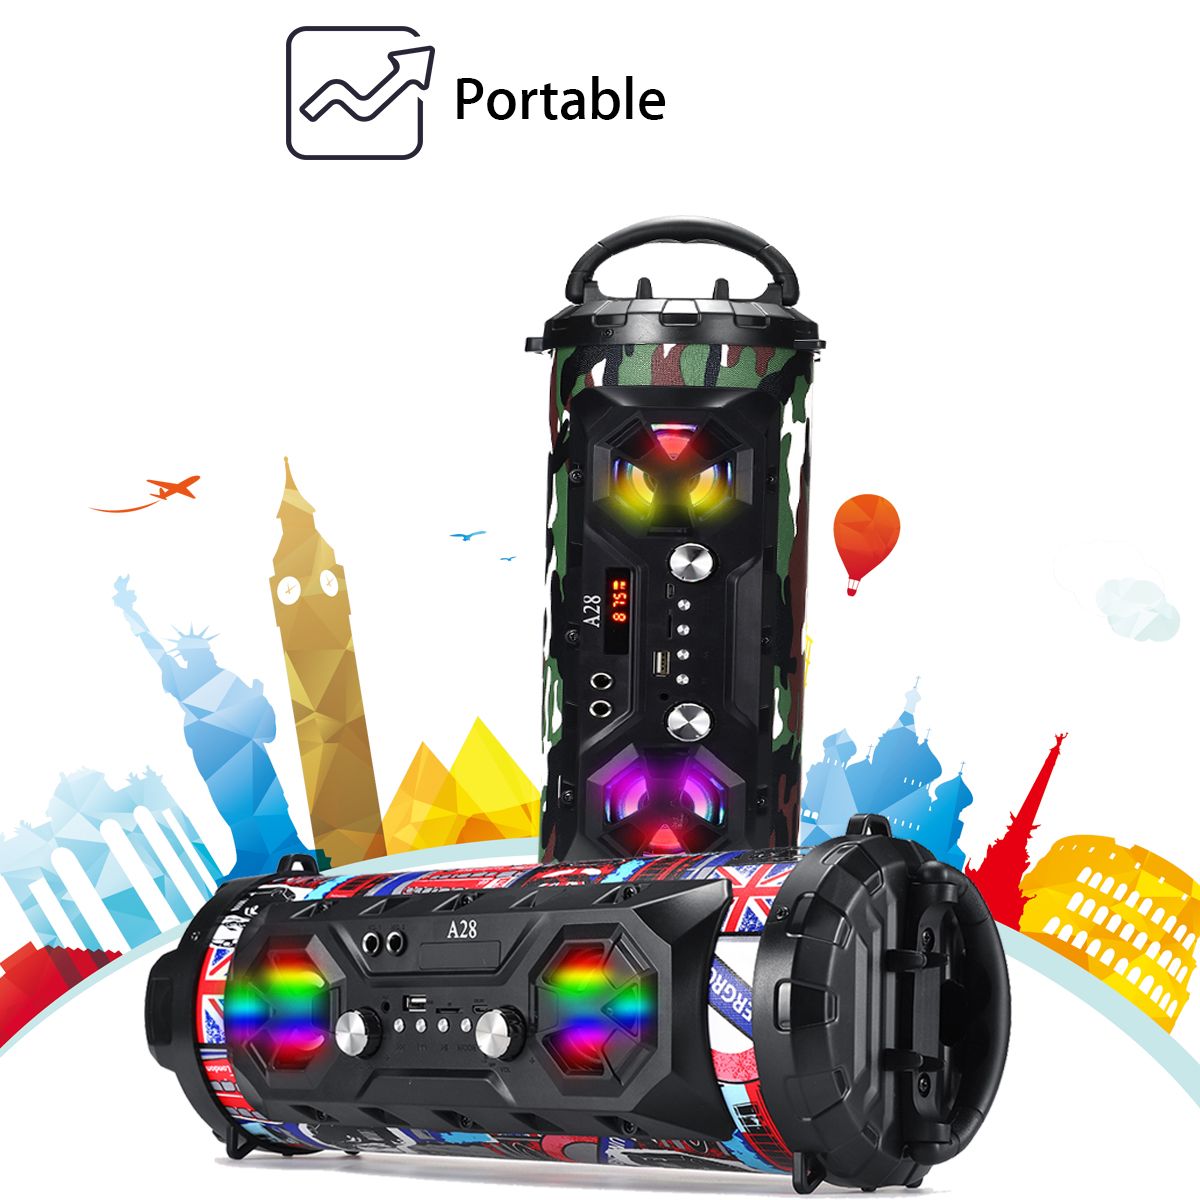 A28-Portable-bluetooth-Super-Bass-Speaker-Phone-Holder-TF-FM-AUX-in-Outdoor-Handsfree-Headset-With-M-1412991